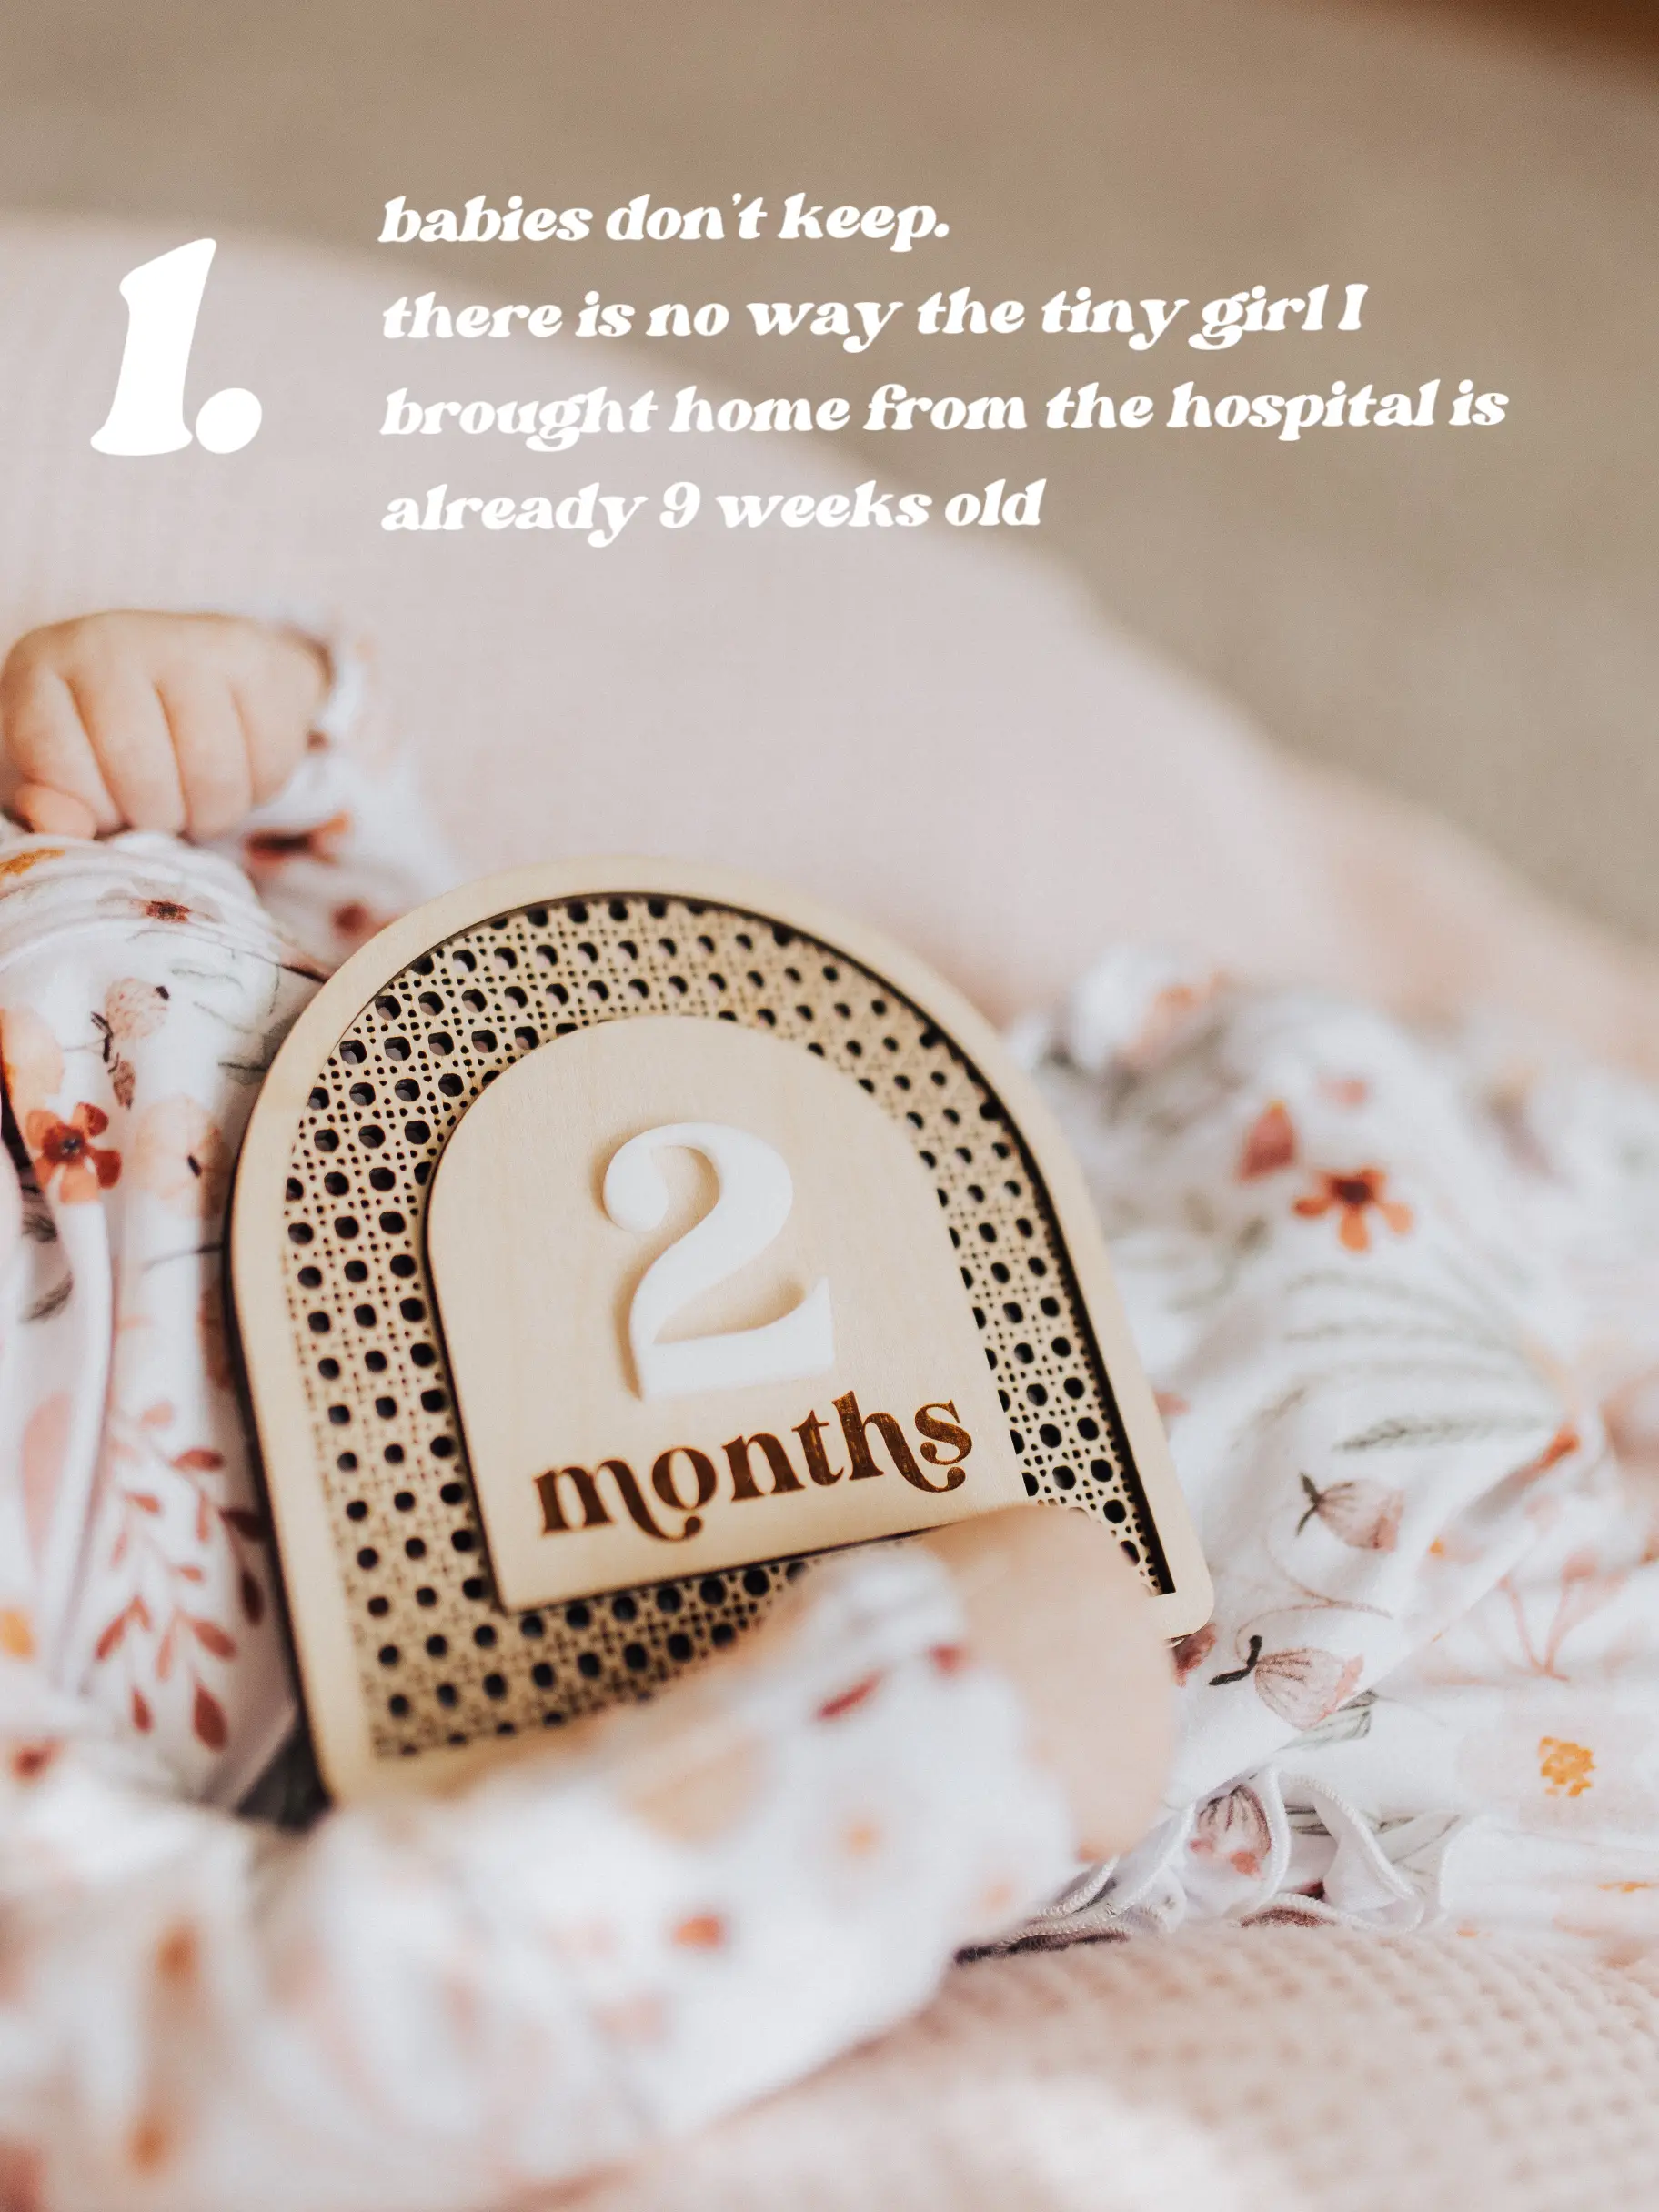 The second trimester - A sweet spot of pregnancy! Enjoy this magical phase  🌸✨ Disclaimer: The information shared above is based on